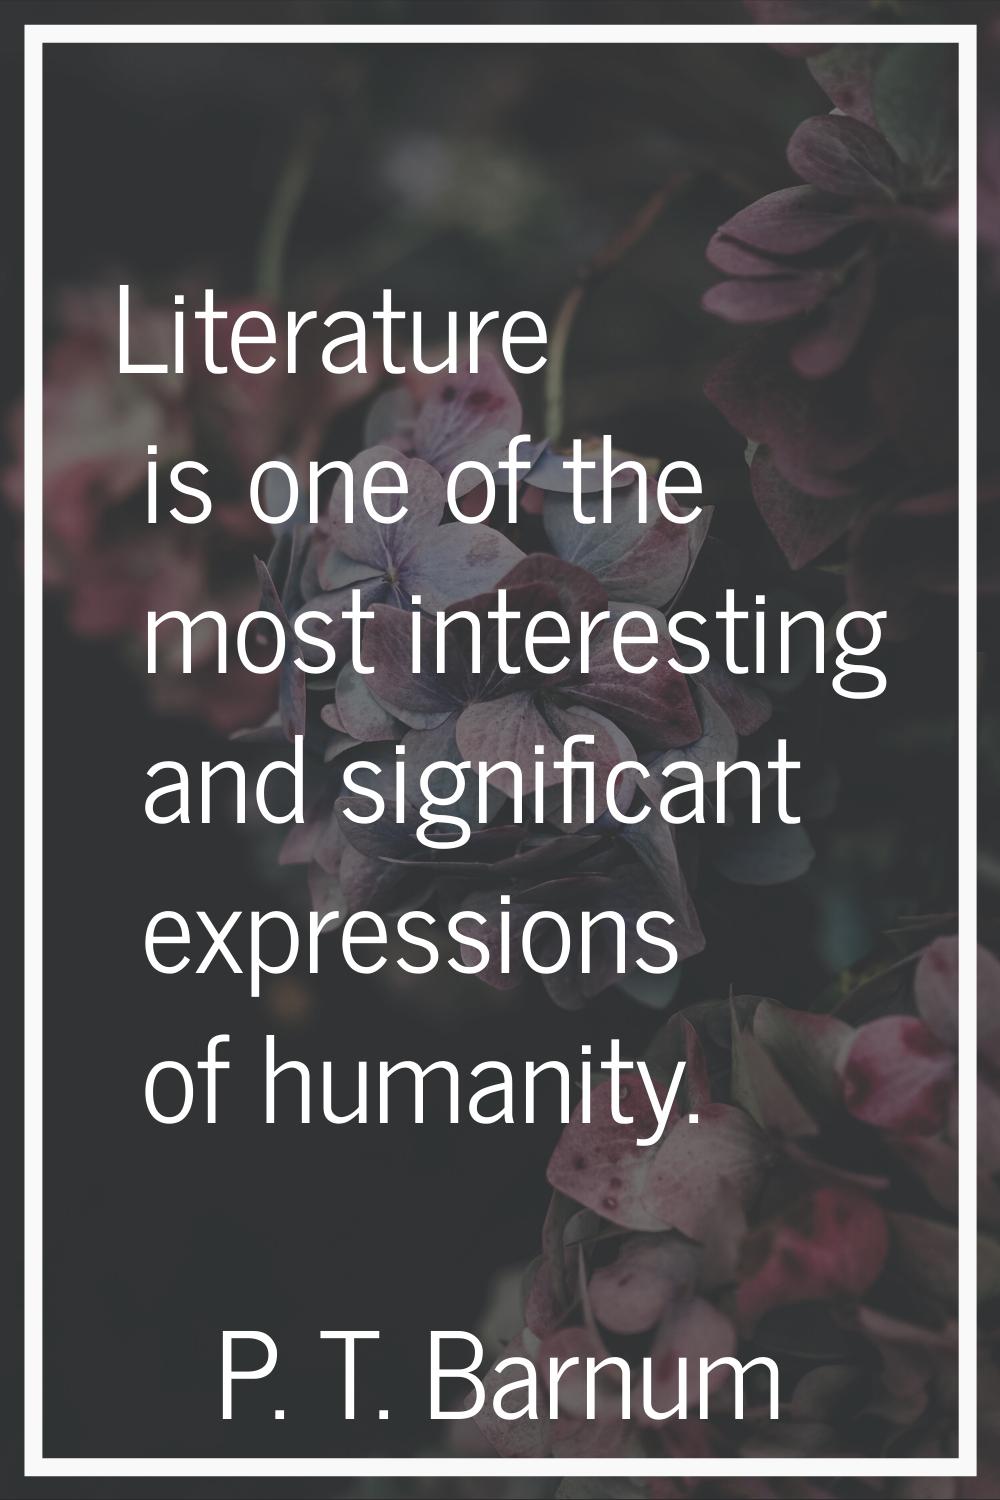 Literature is one of the most interesting and significant expressions of humanity.